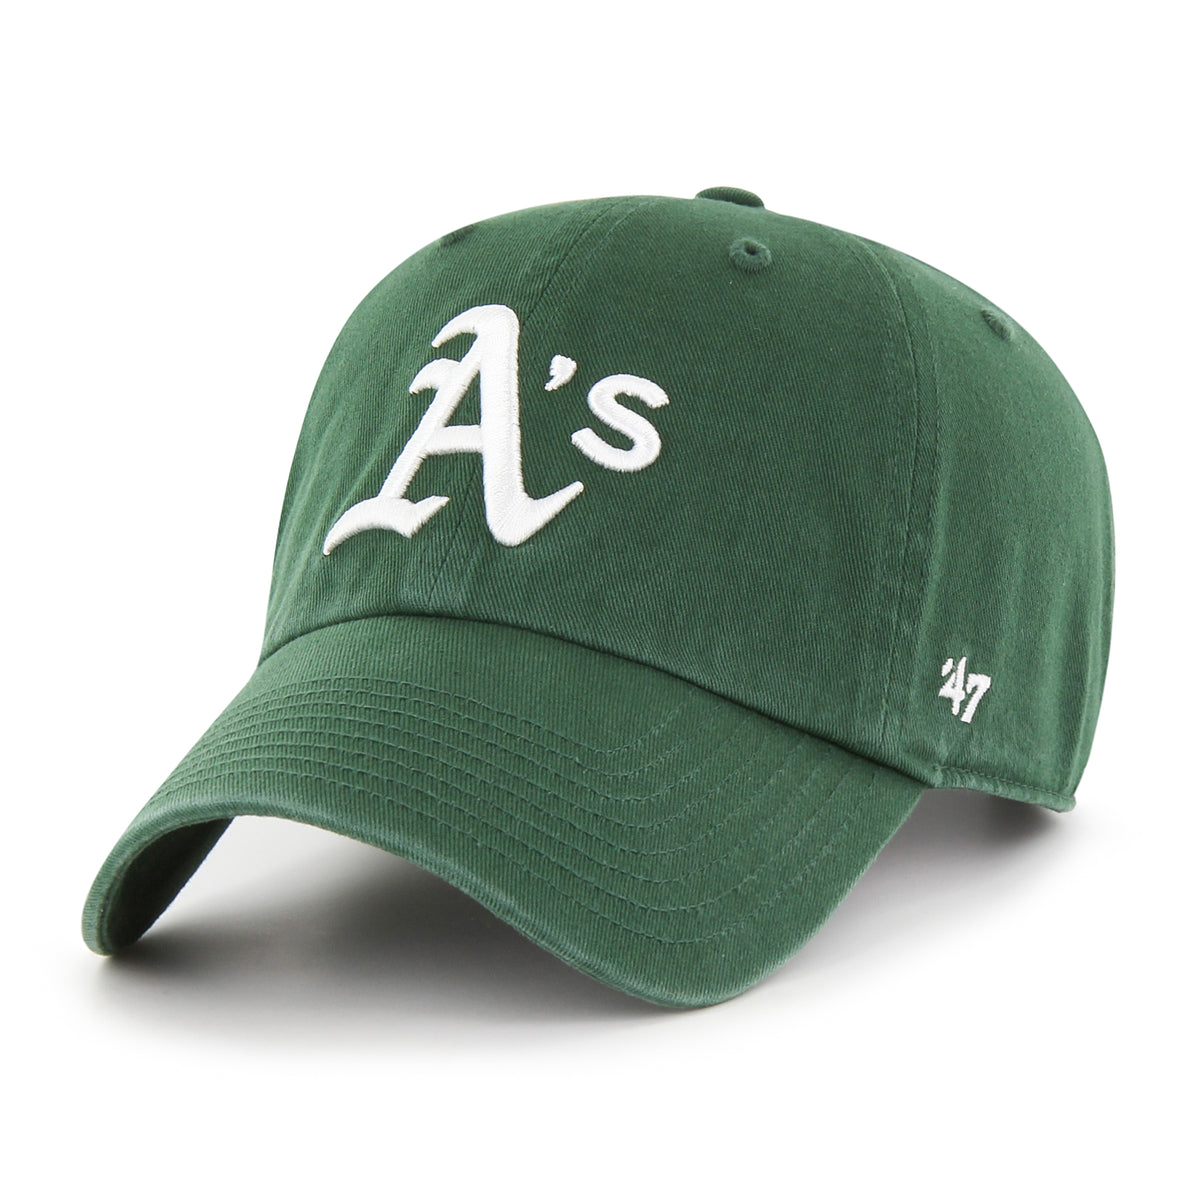 OAKLAND ATHLETICS 47 CLEAN UP